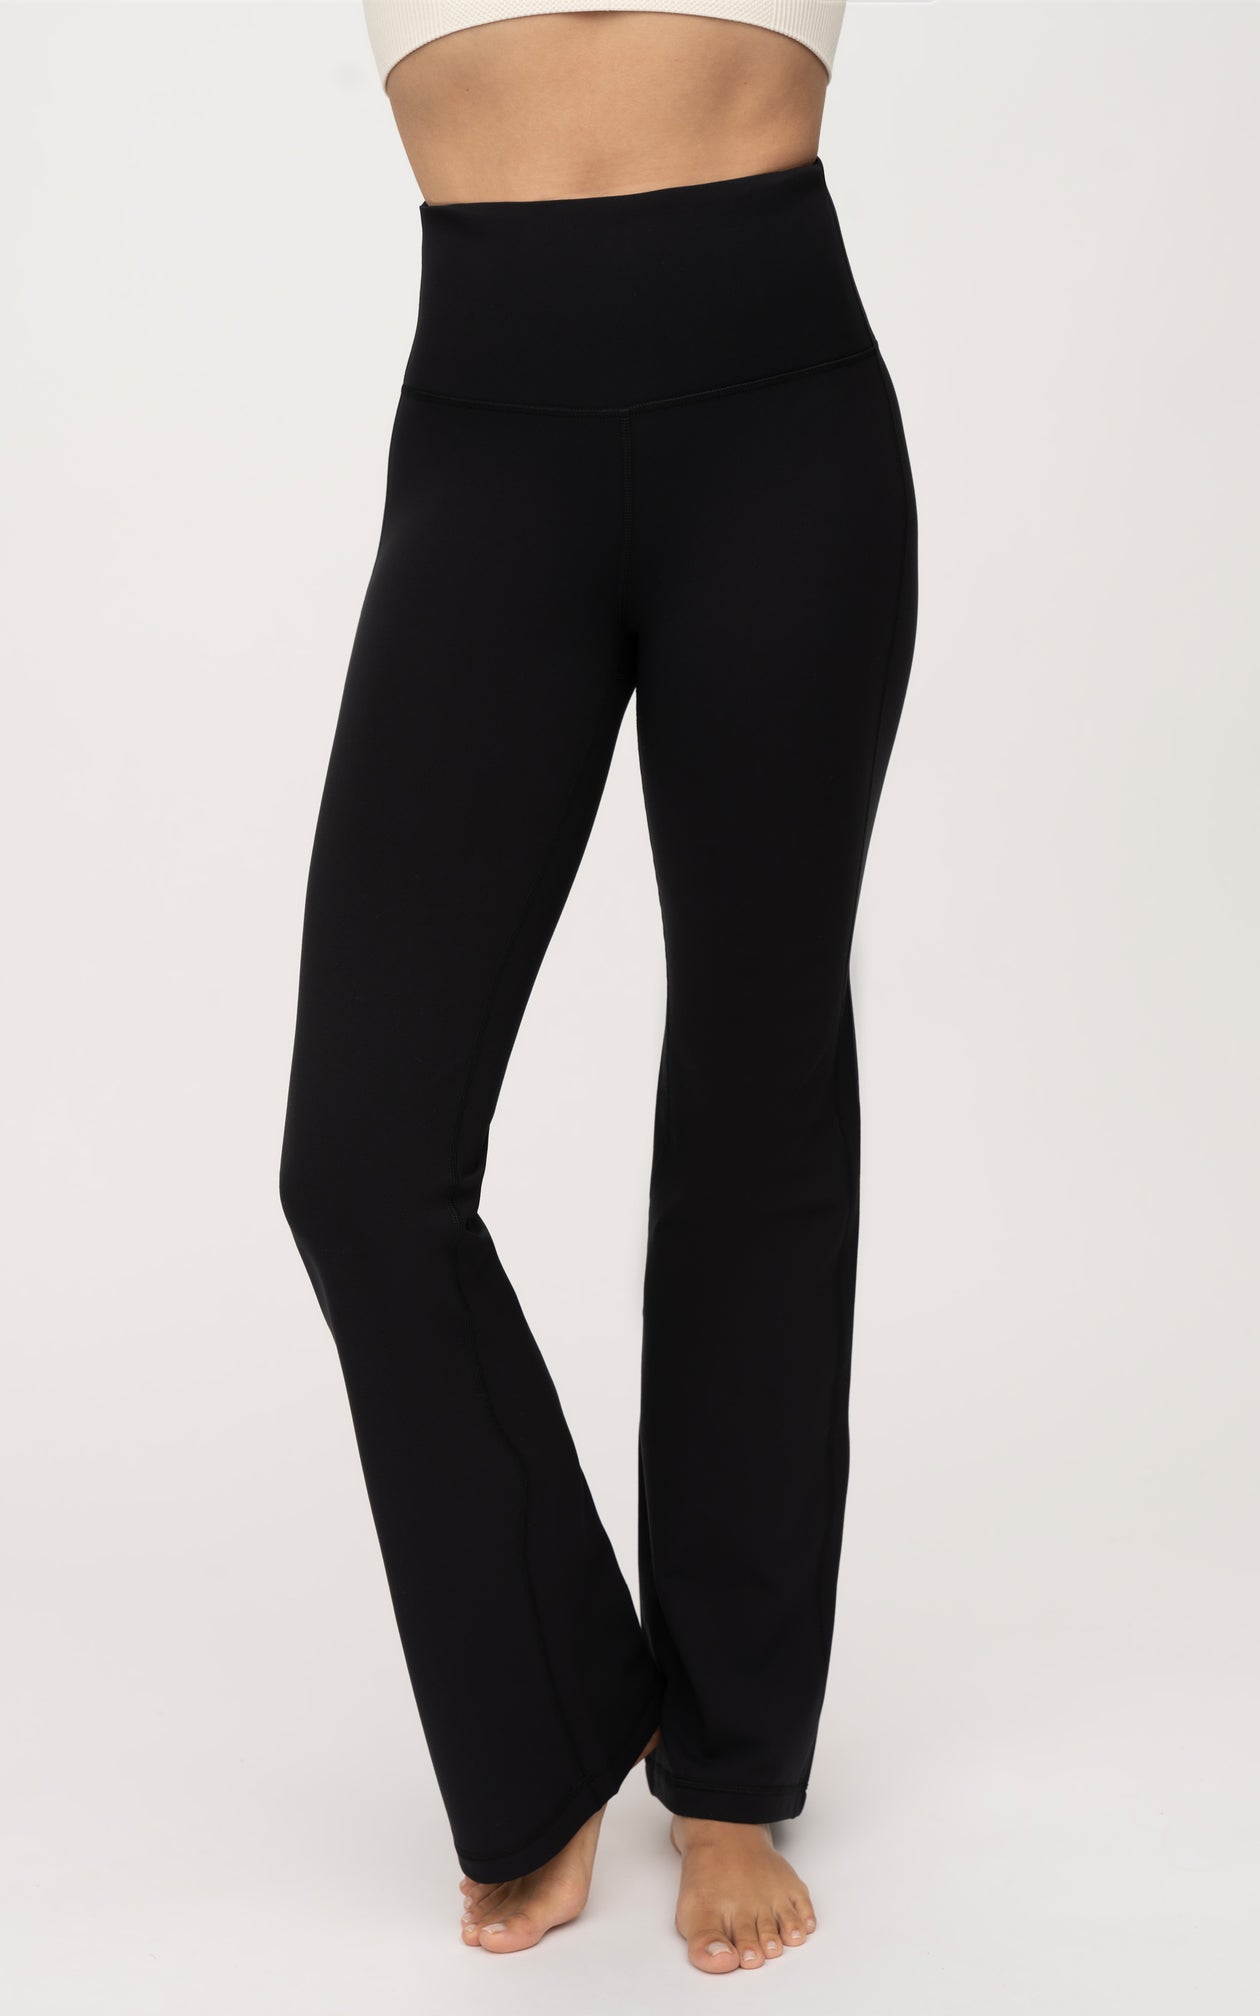 90 Degree by Reflex High Waist Flare Pants on SALE